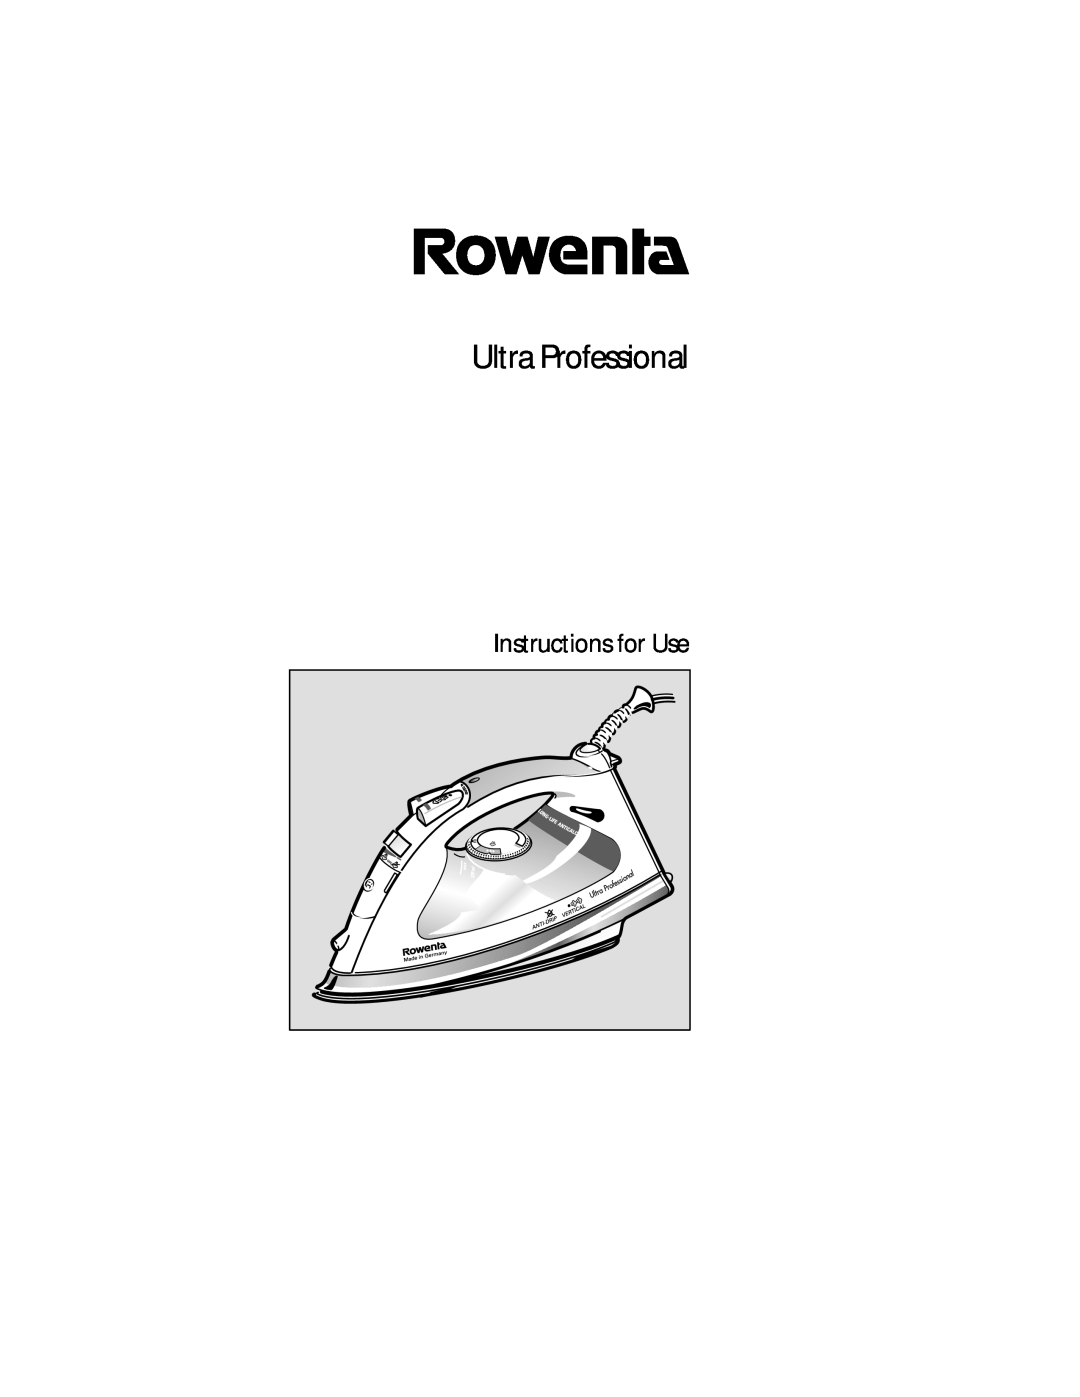 Rowenta Professional Steam Iron manual Ultra Professional, Instructions for Use 